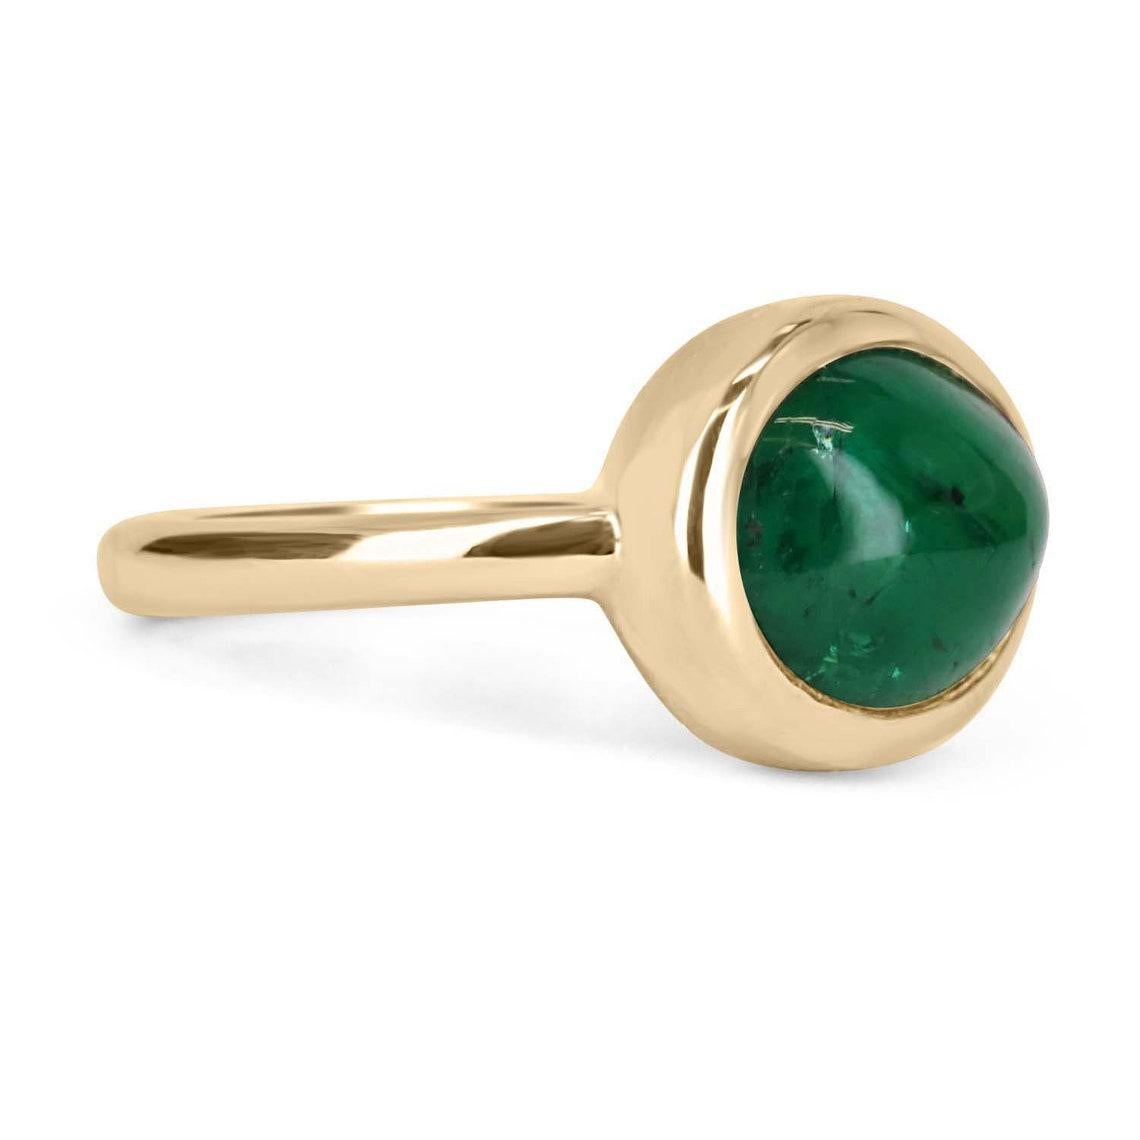 A bezel-set emerald cabochon ring in 14K yellow gold. Featured here is this lovely 4.77-carat natural, earth-mined, emerald cabochon. This stone displays a gorgeous, dark green color, and very good luster. This natural beauty is set in a 14K yellow